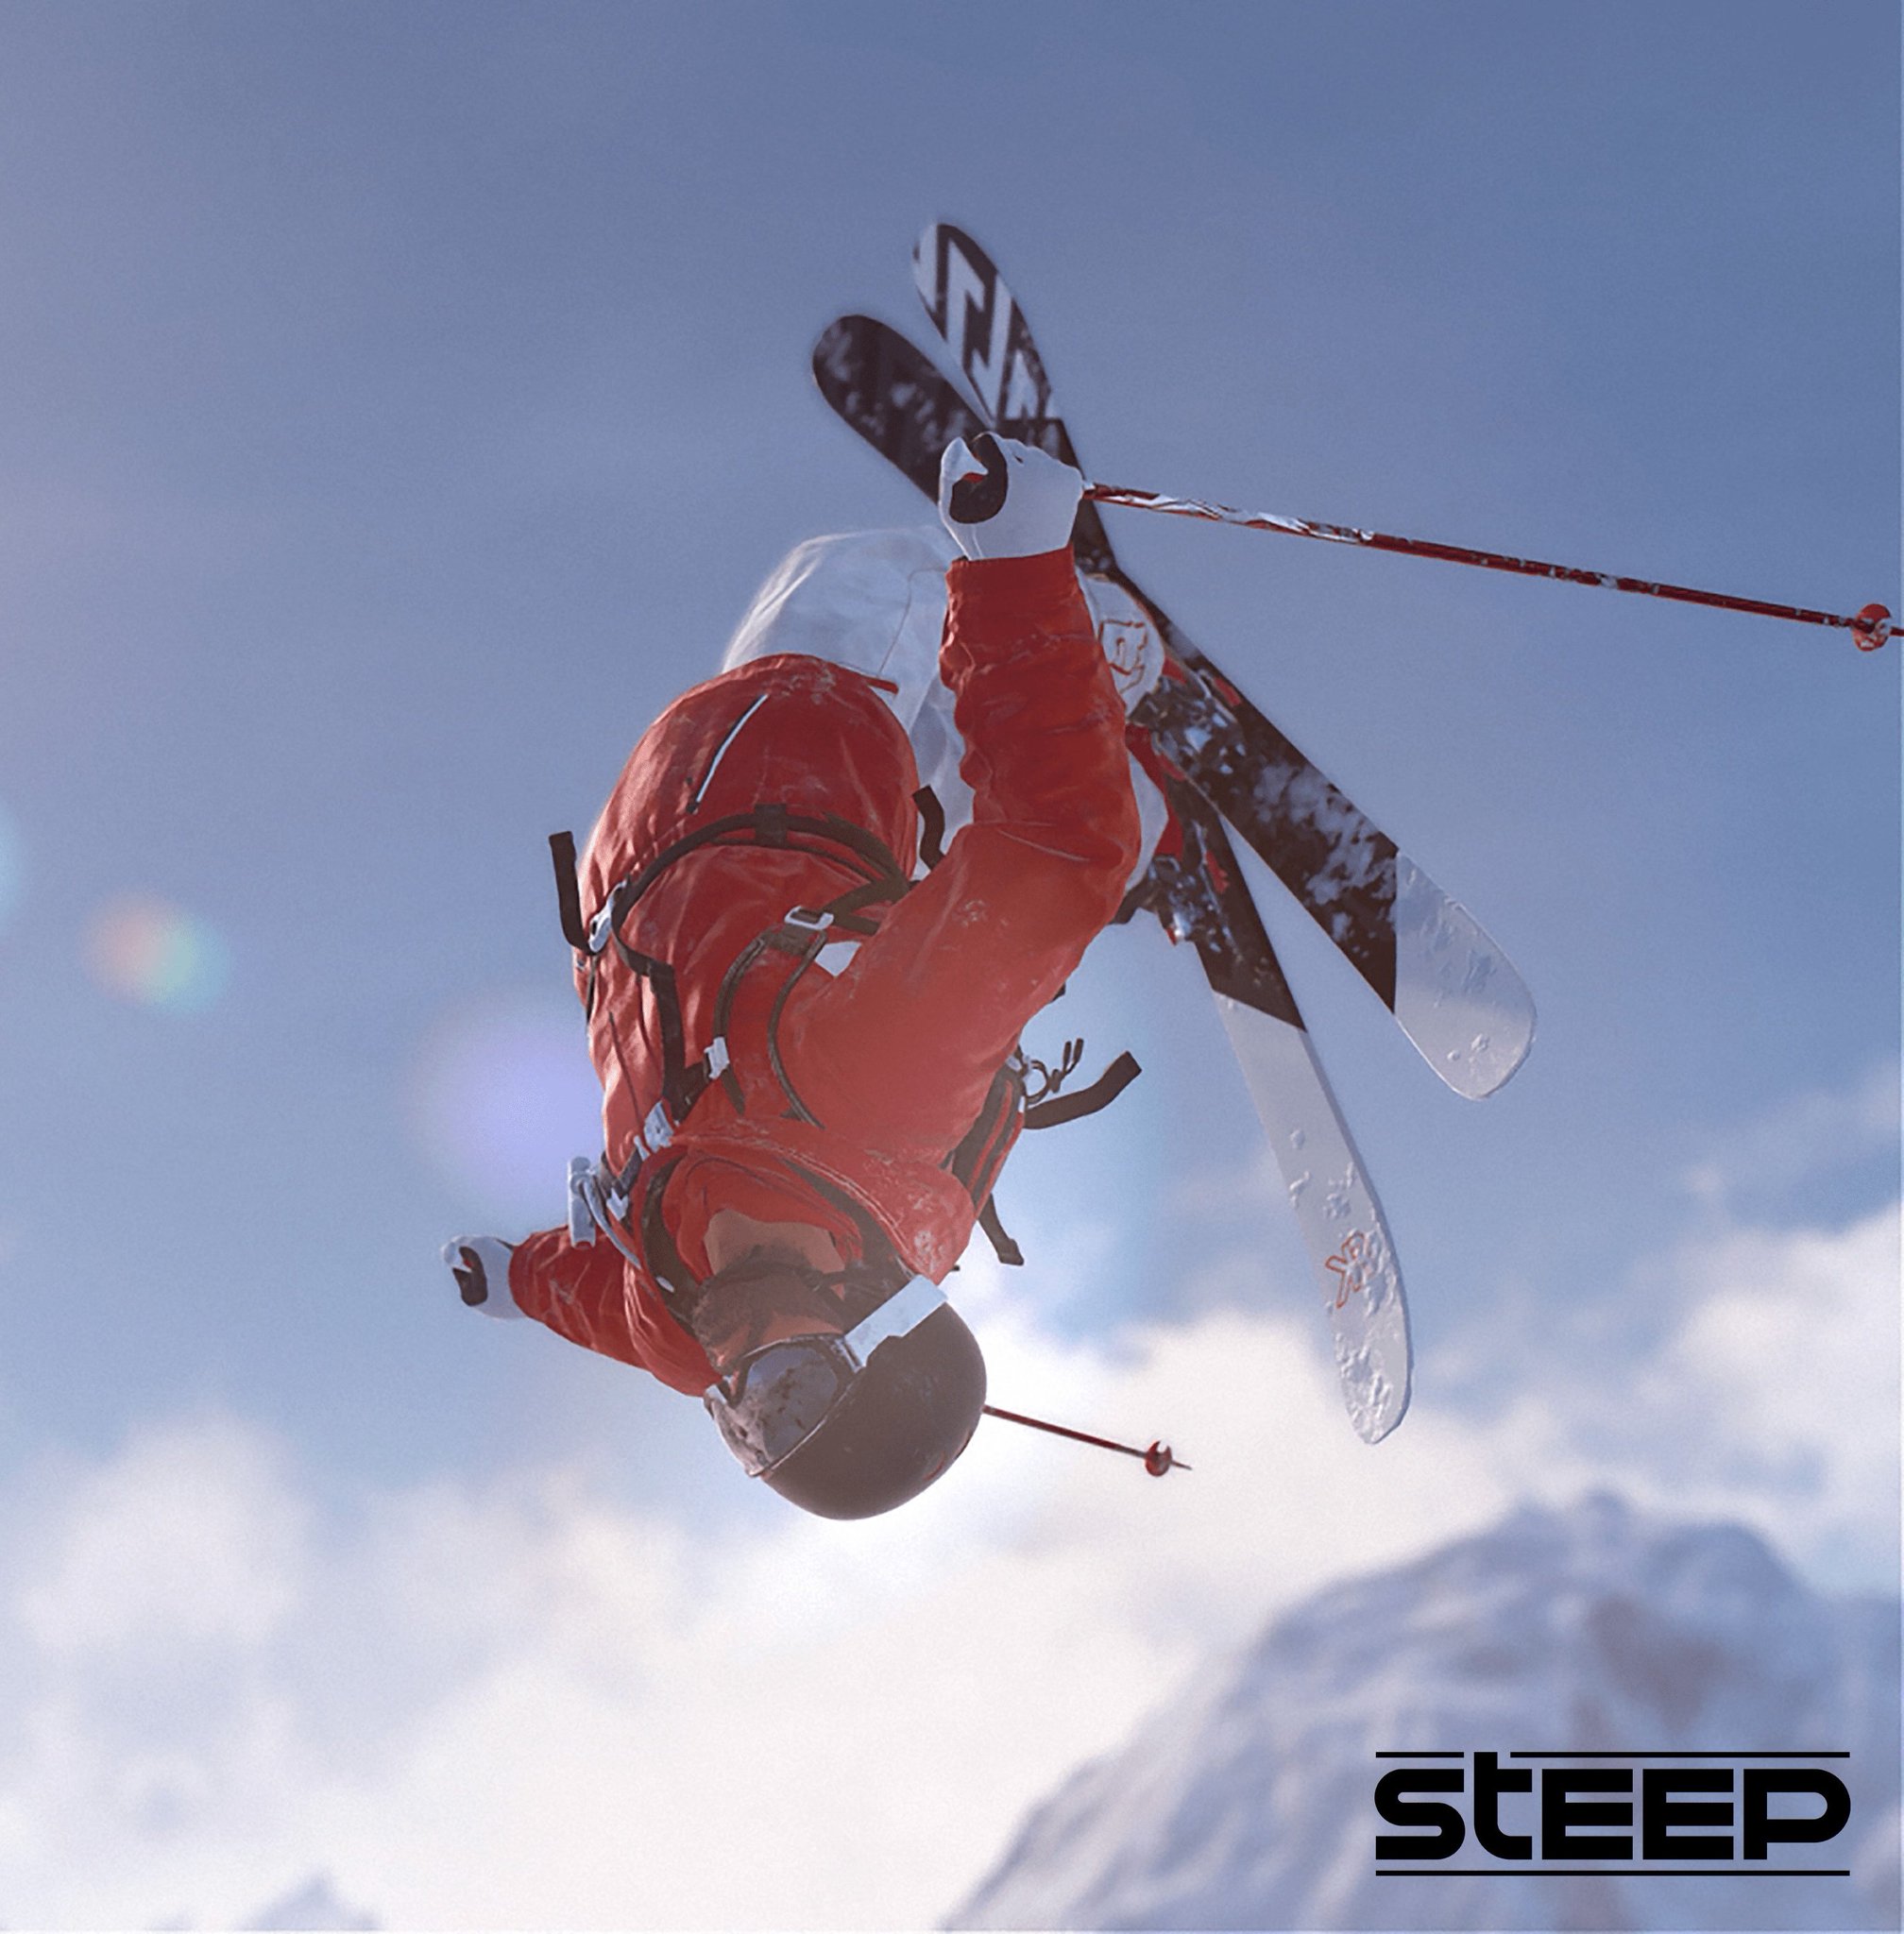 metacritic on Twitter: "PlayStation Free Games for January: Steep - 71] https://t.co/zP7wfvTq8f Portal Knights - 71] https://t.co/d6uvm3nu05 &amp; More Free Games on All Systems: https://t.co/2xIUup5g59 https://t.co/vQNPGFnSFF" / Twitter